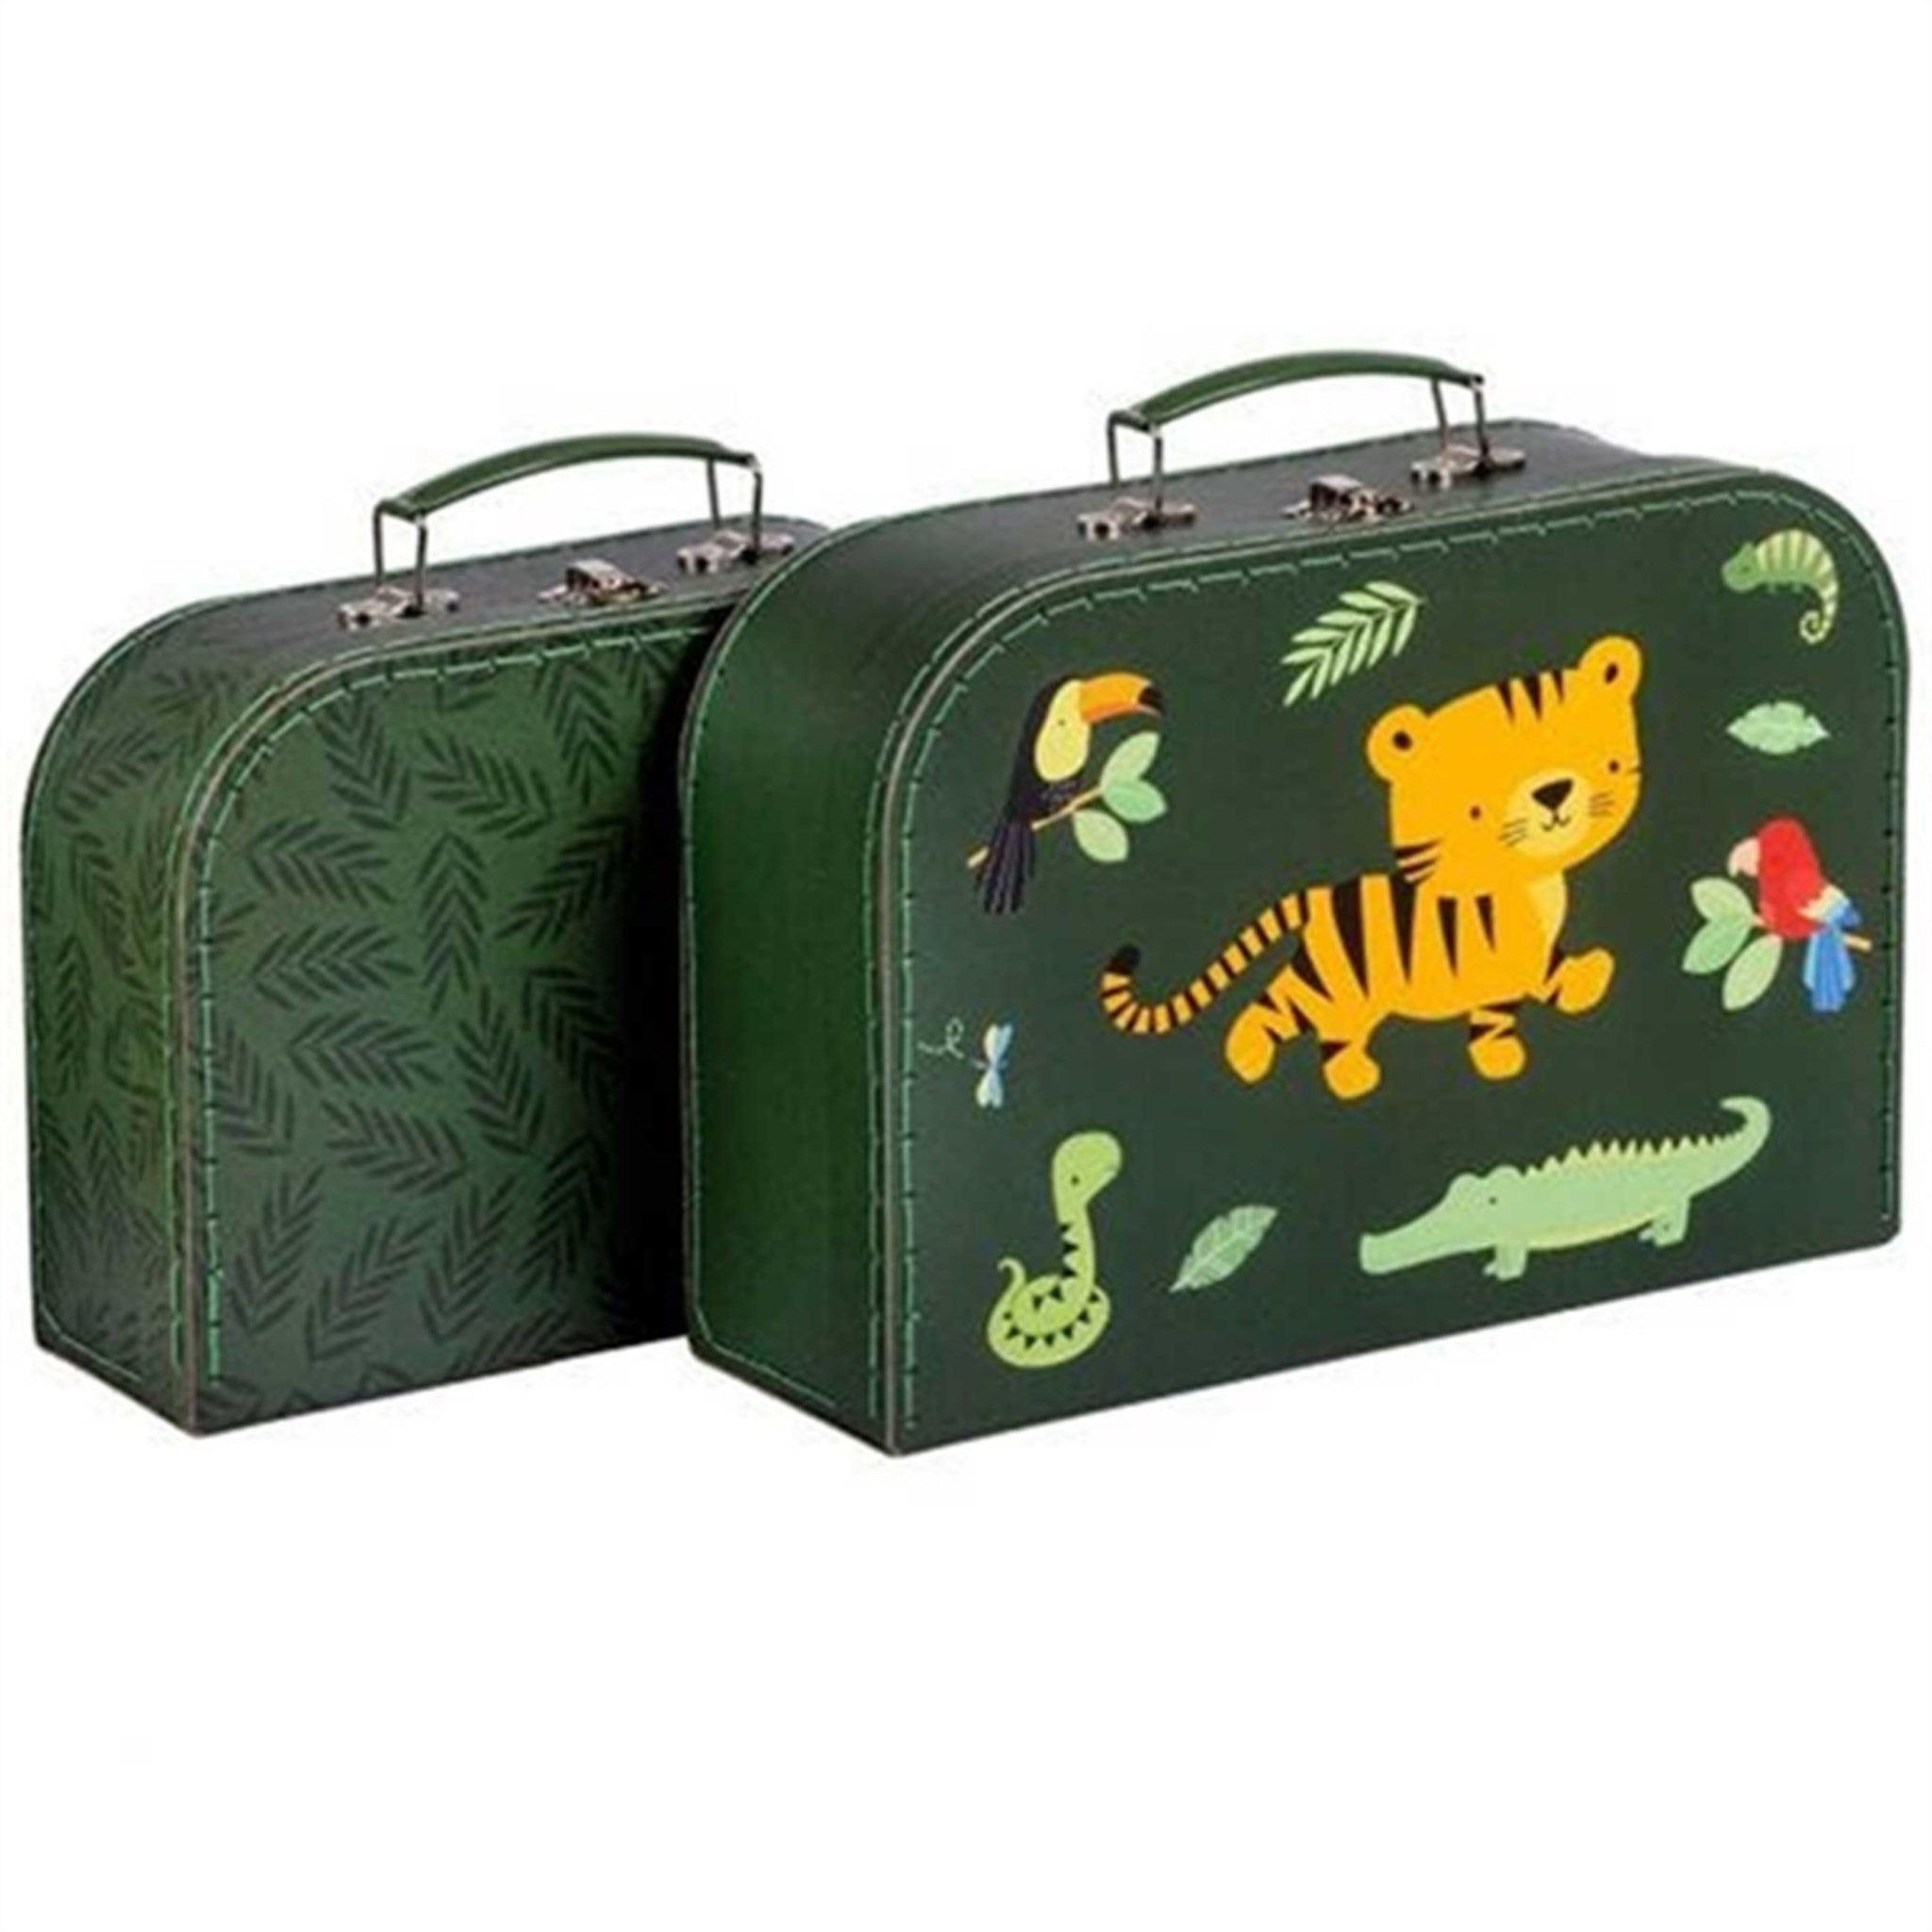 A Little Love Company Suitcase 2-pack Jungle Tiger